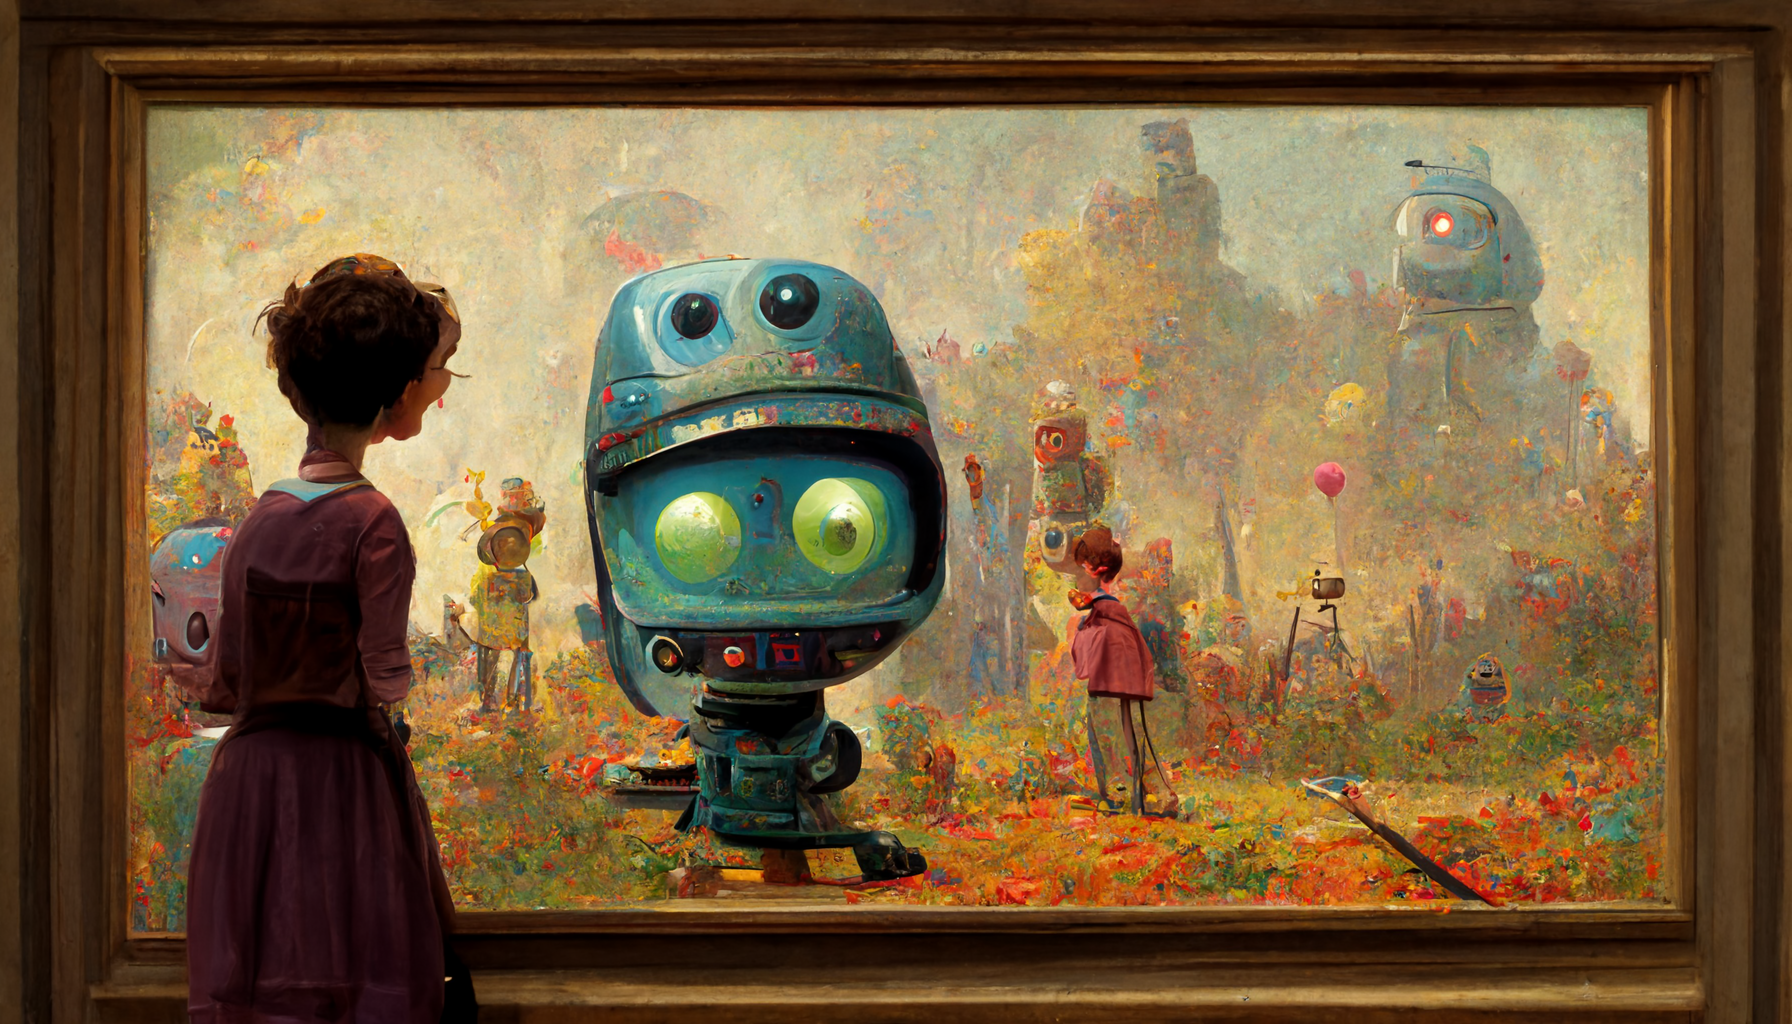 Woman Looking at Painting of a Robot